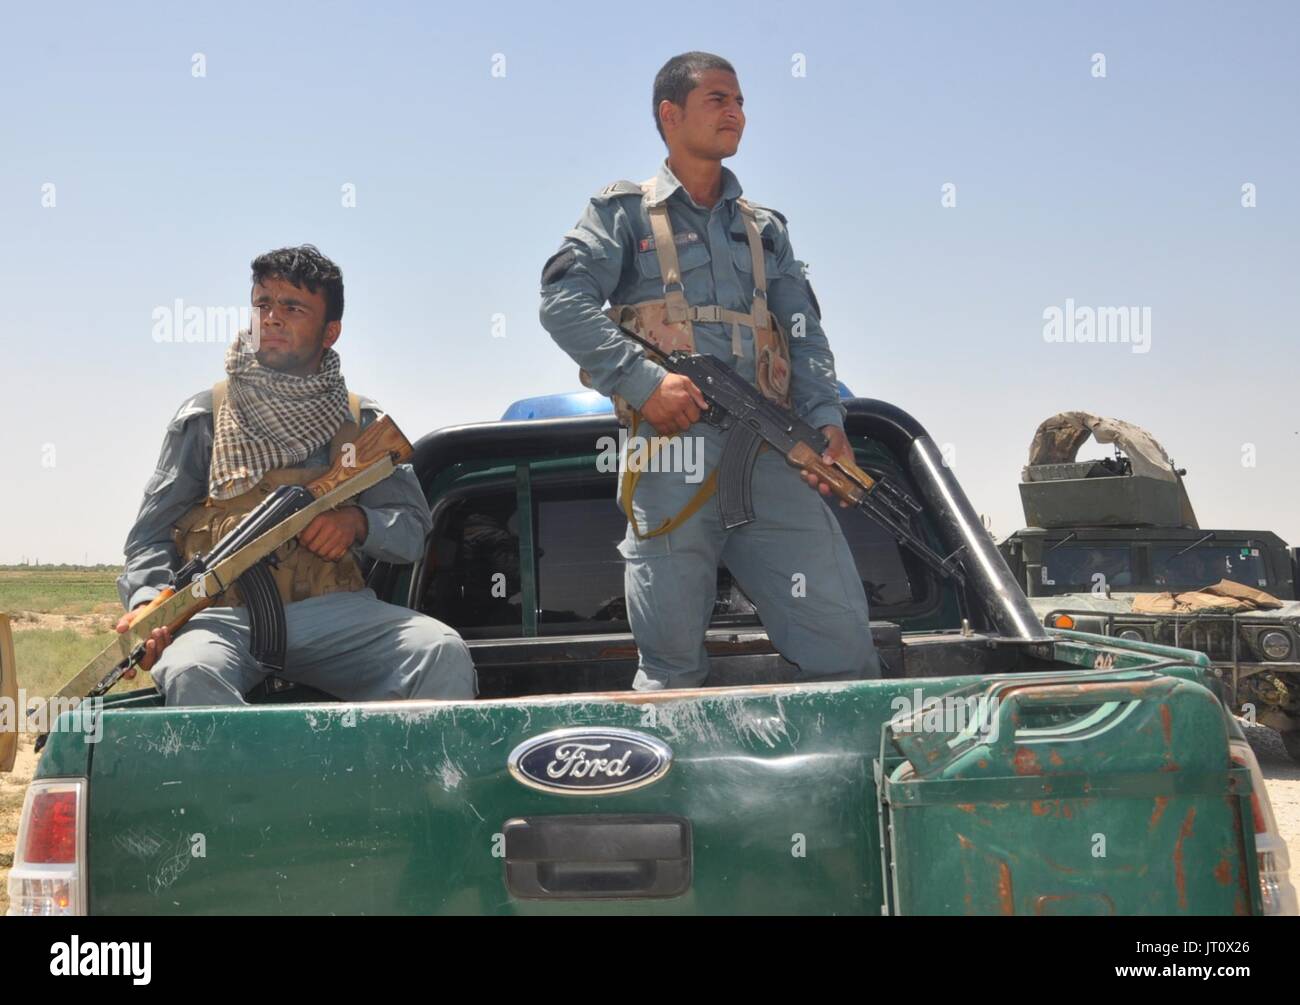 Shiberghan, Afghanistan. 6th Aug, 2017. Members of Afghan security forces take part in a military operation in Aqcha district of Jawzjan province, Afghanistan, Aug. 6, 2017. As many as 12 militants have been killed in separate incidents in two northern Afghan provinces, officials said on Sunday. Fighting has escalated as the Taliban insurgency spread from its traditional strongholds in southern and eastern Afghanistan to the once peaceful northern region, where Taliban have been recruiting from the youths. Credit: Mohammad Jan Aria/Xinhua/Alamy Live News Stock Photo